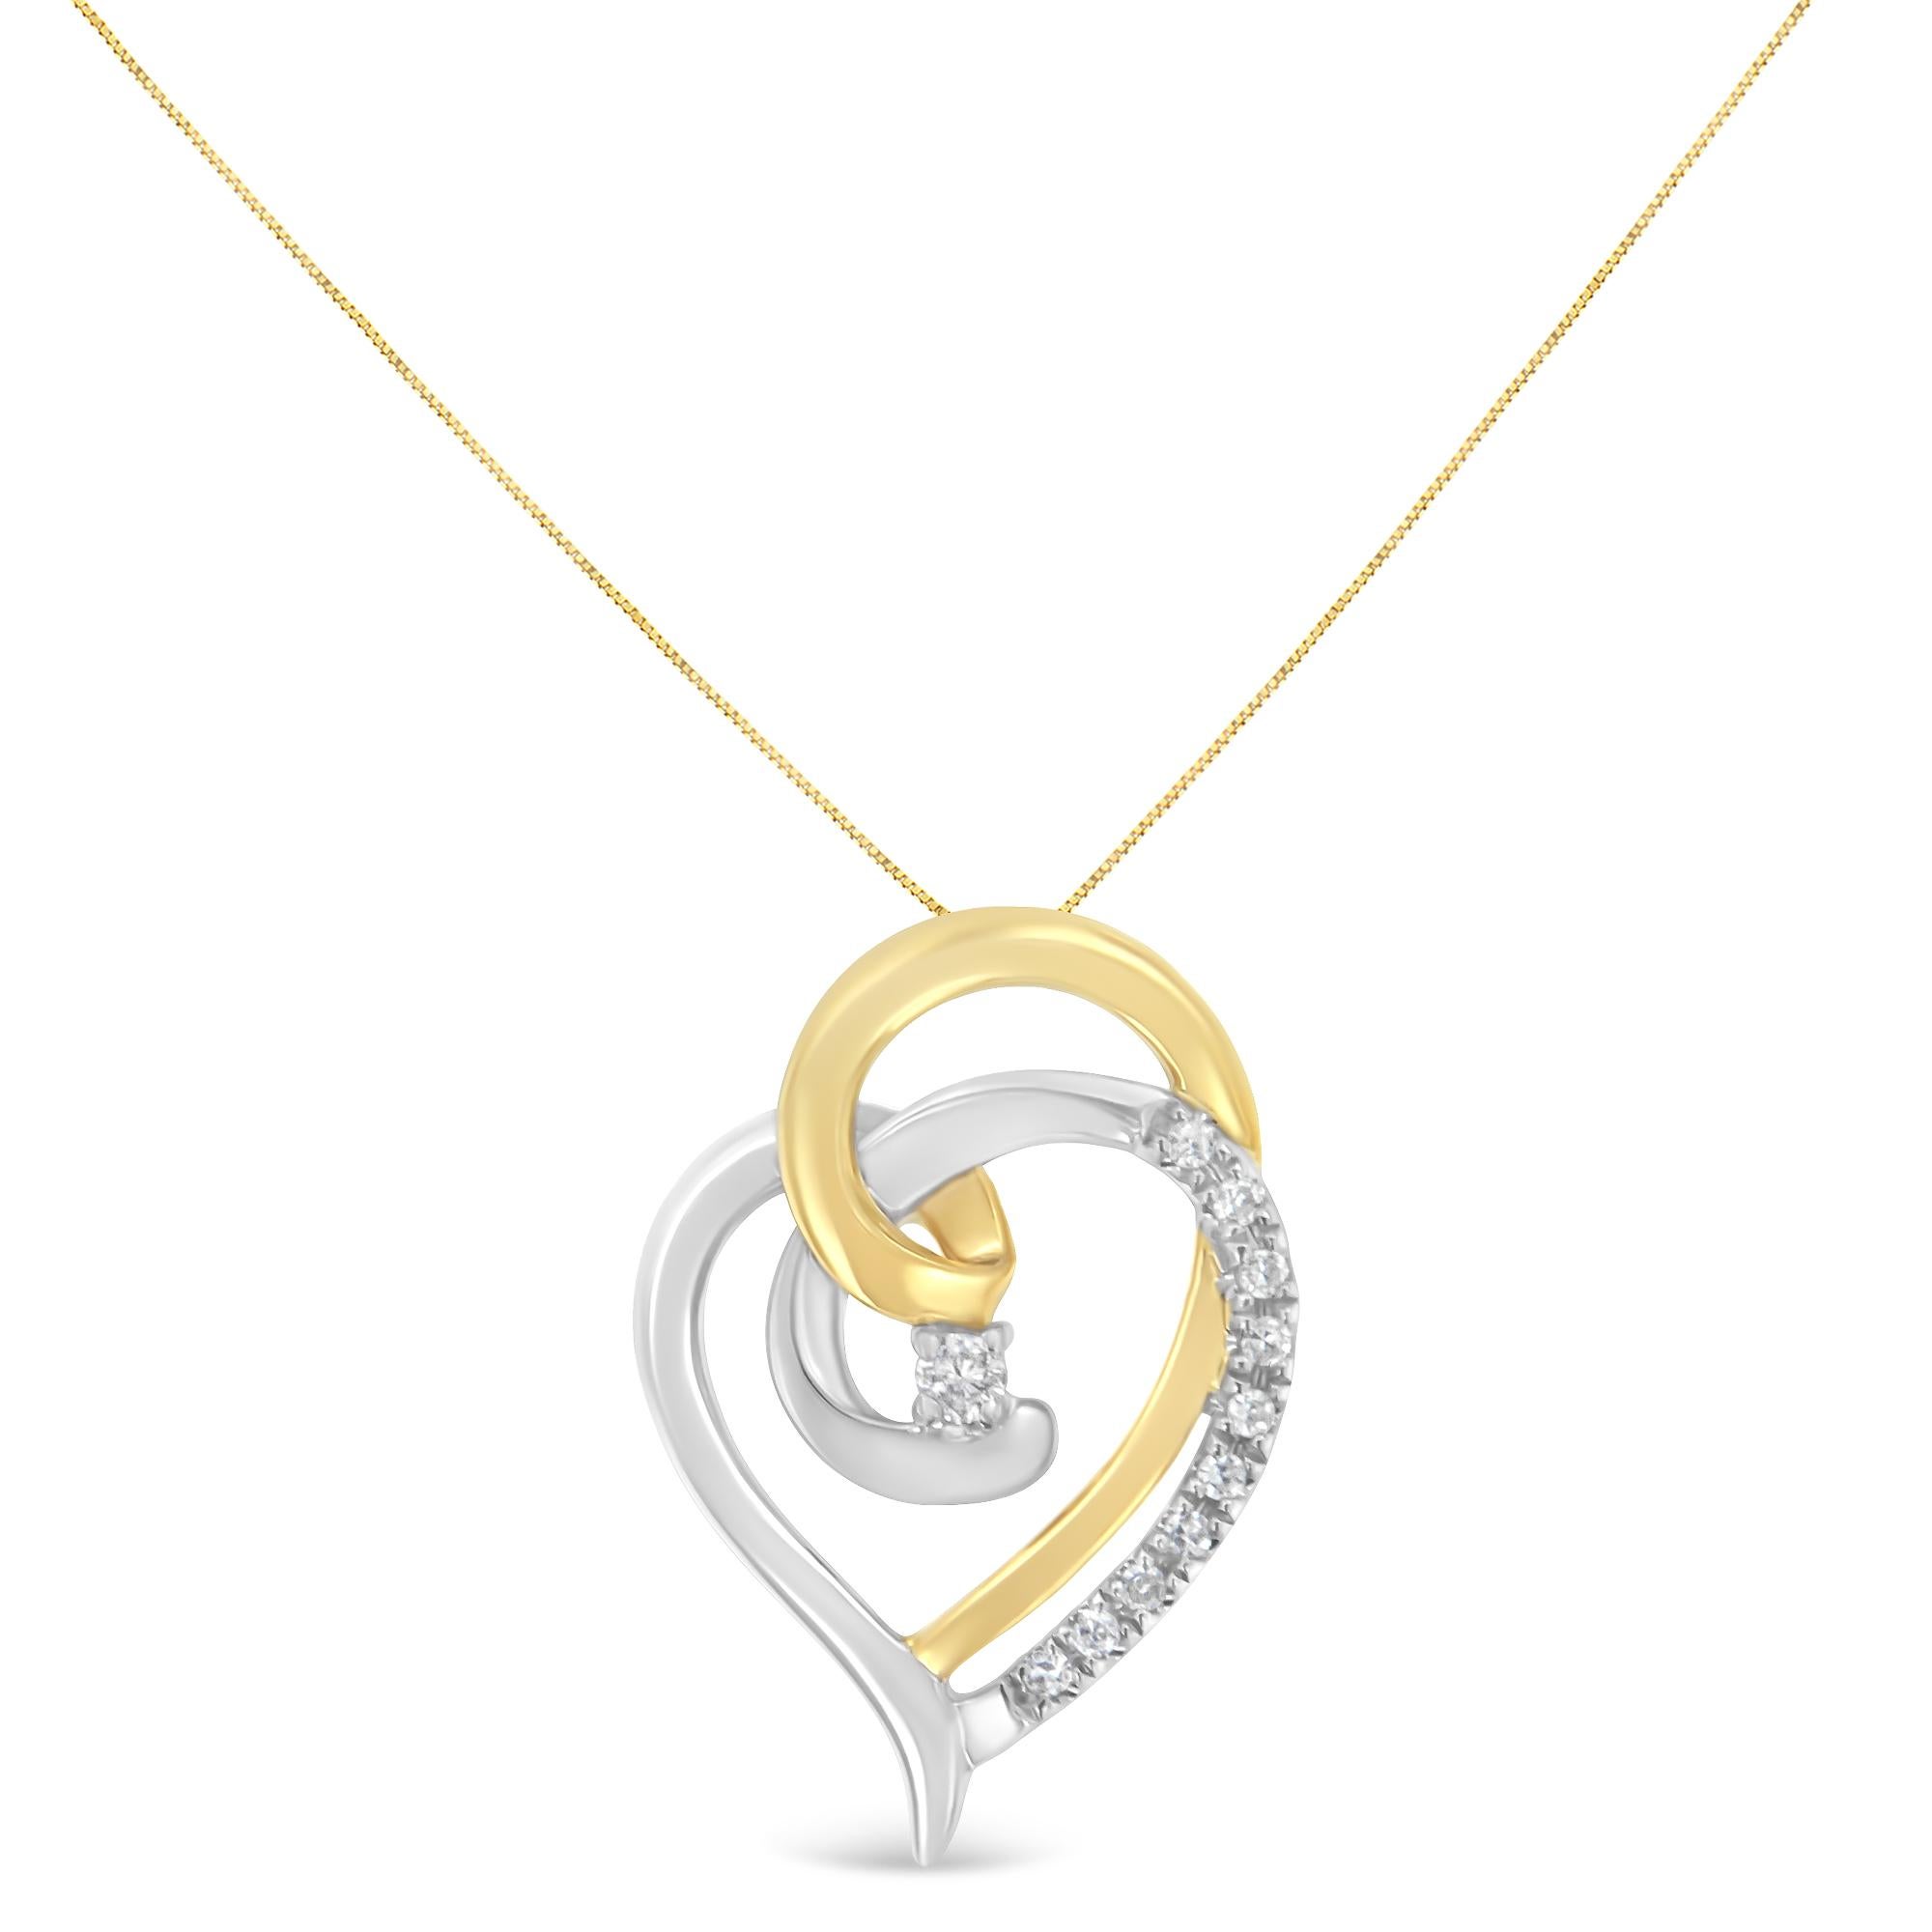 Here's a beautiful way to celebrate your love. With no shortage of flourishes, this loosely shaped heart pendant features swirls of white gold dotted with diamonds, and wrapped around a whimsical wave of yellow gold, cascading down to create a